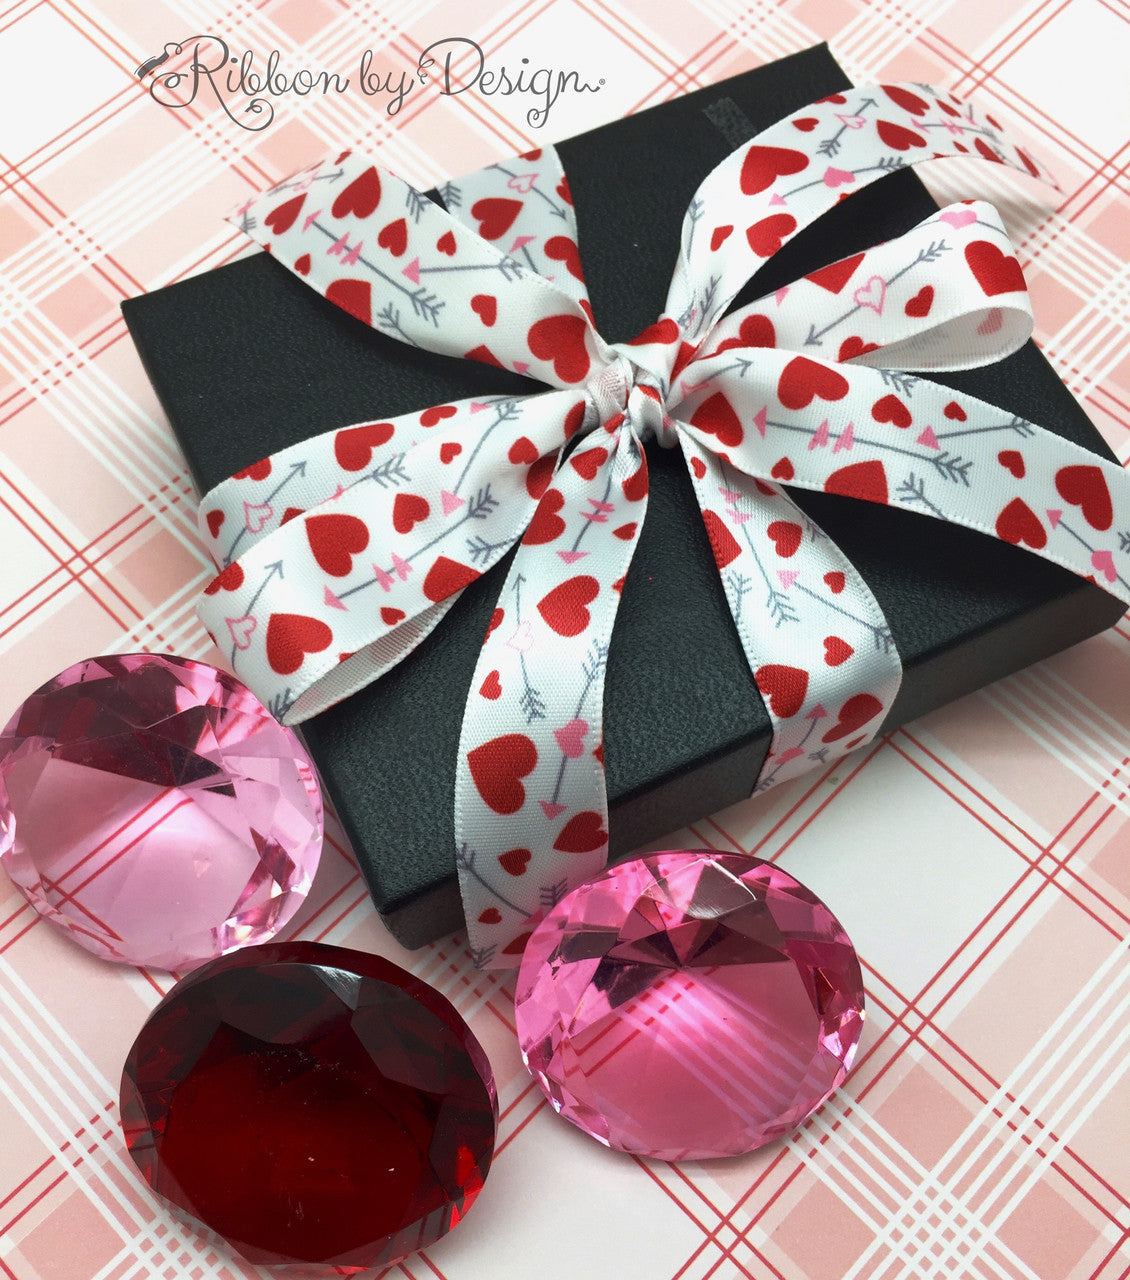 Oh so pretty! This lovely pink, red, gray and white combination makes a lovely gift!